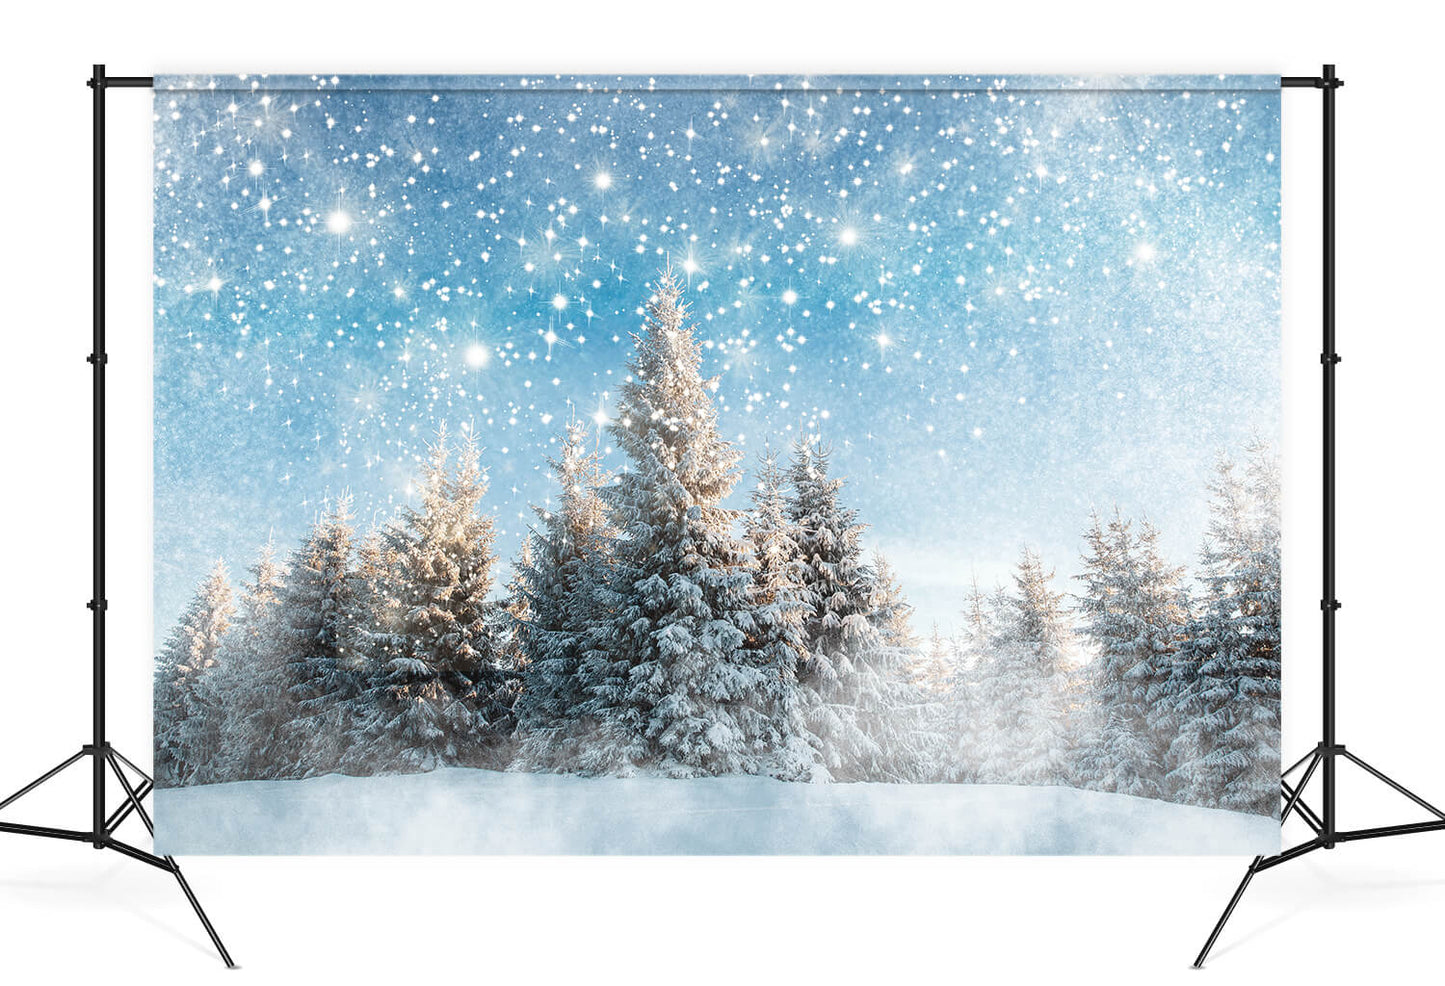 Winter Snowy Pine Forest Photography Backdrop M10-16 – Dbackdrop